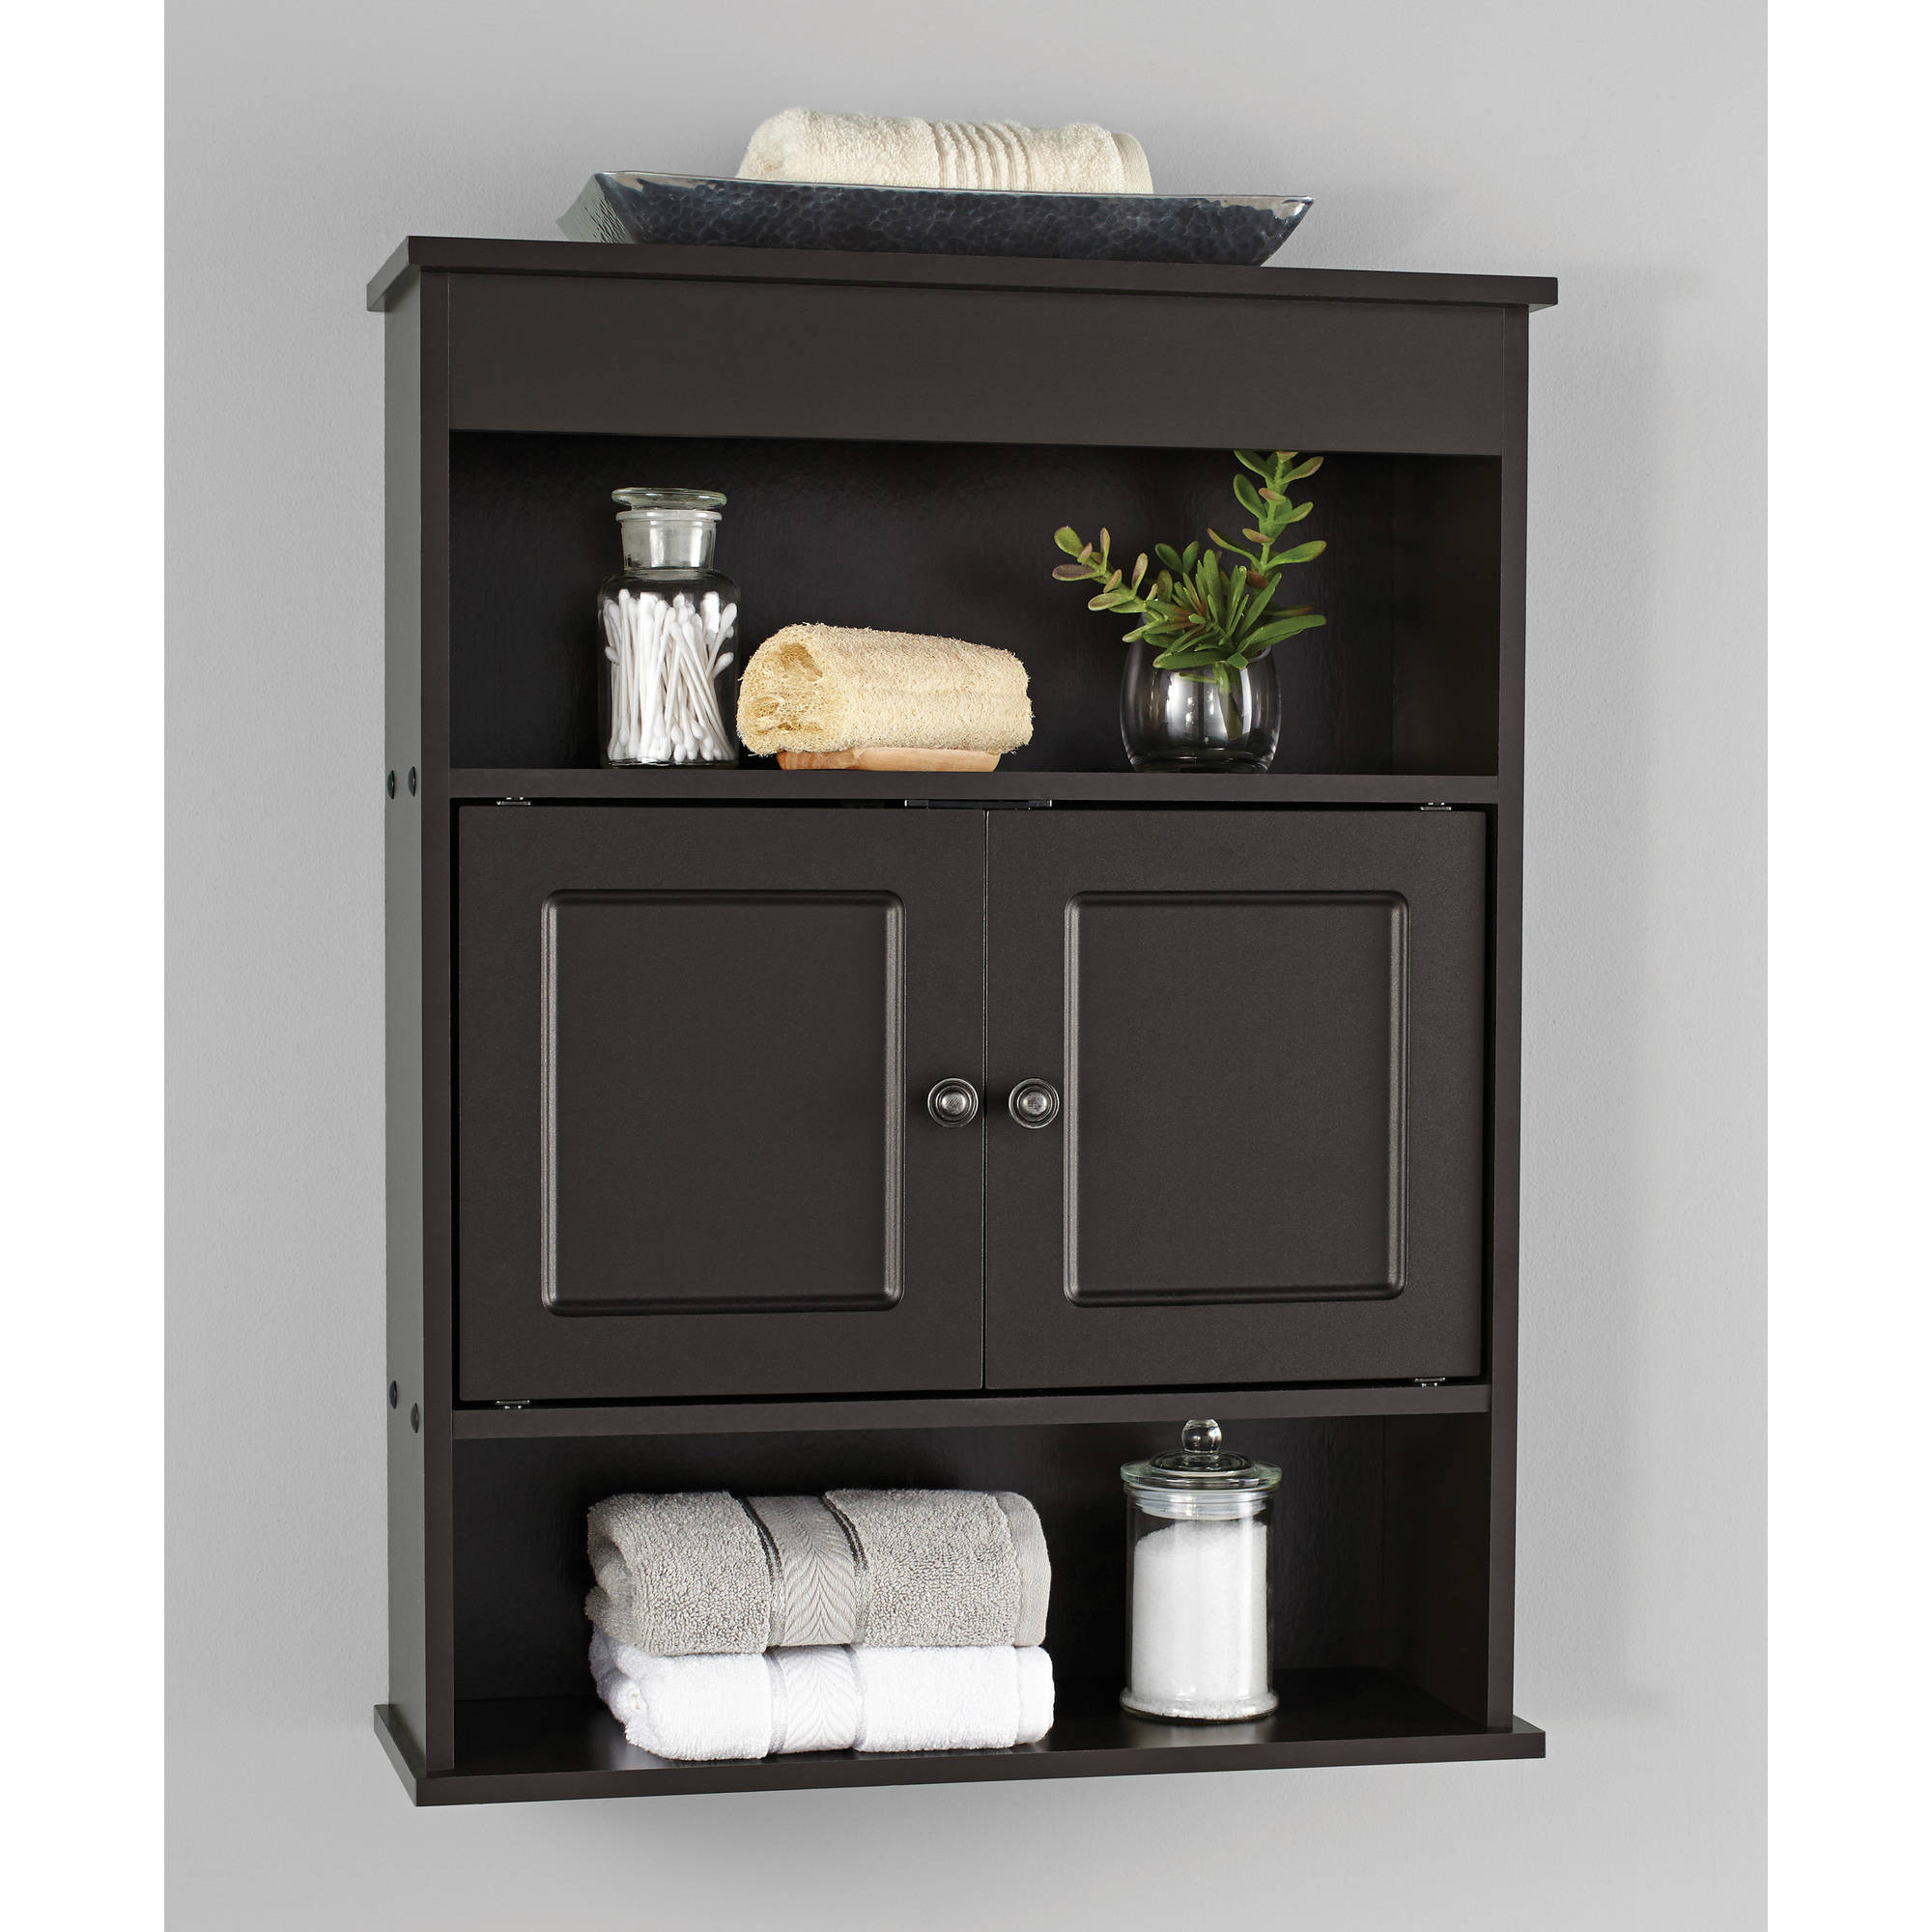 Chapter Bathroom Wall Cabinet Espresso Walmart throughout proportions 2000 X 2000